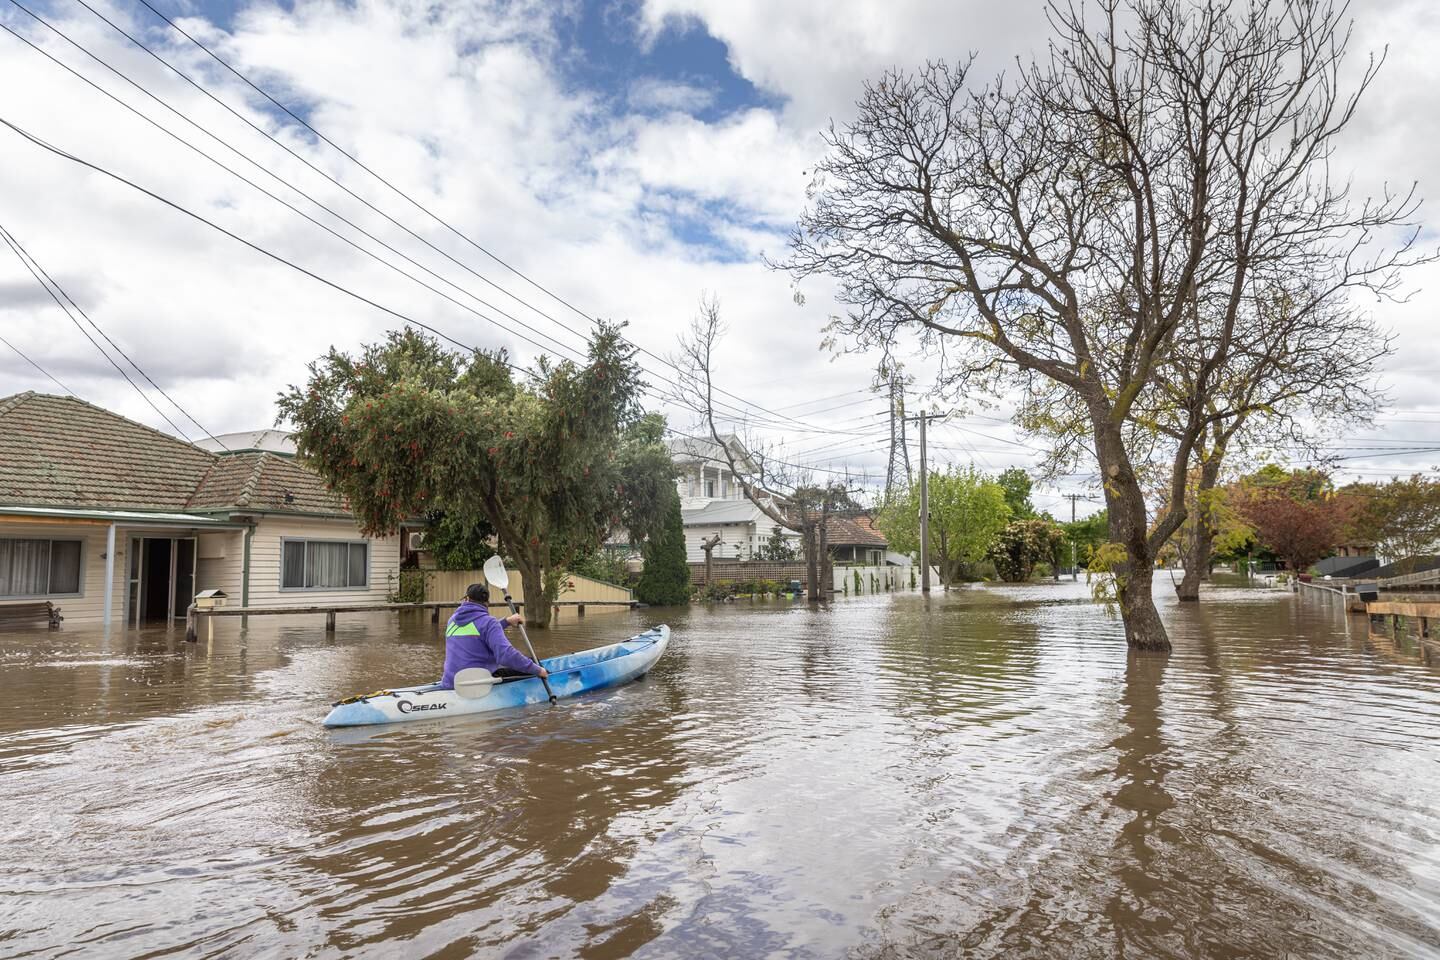 Victoria, the state in which Melbourne is located, has been hit by severe floods the past week. Getty